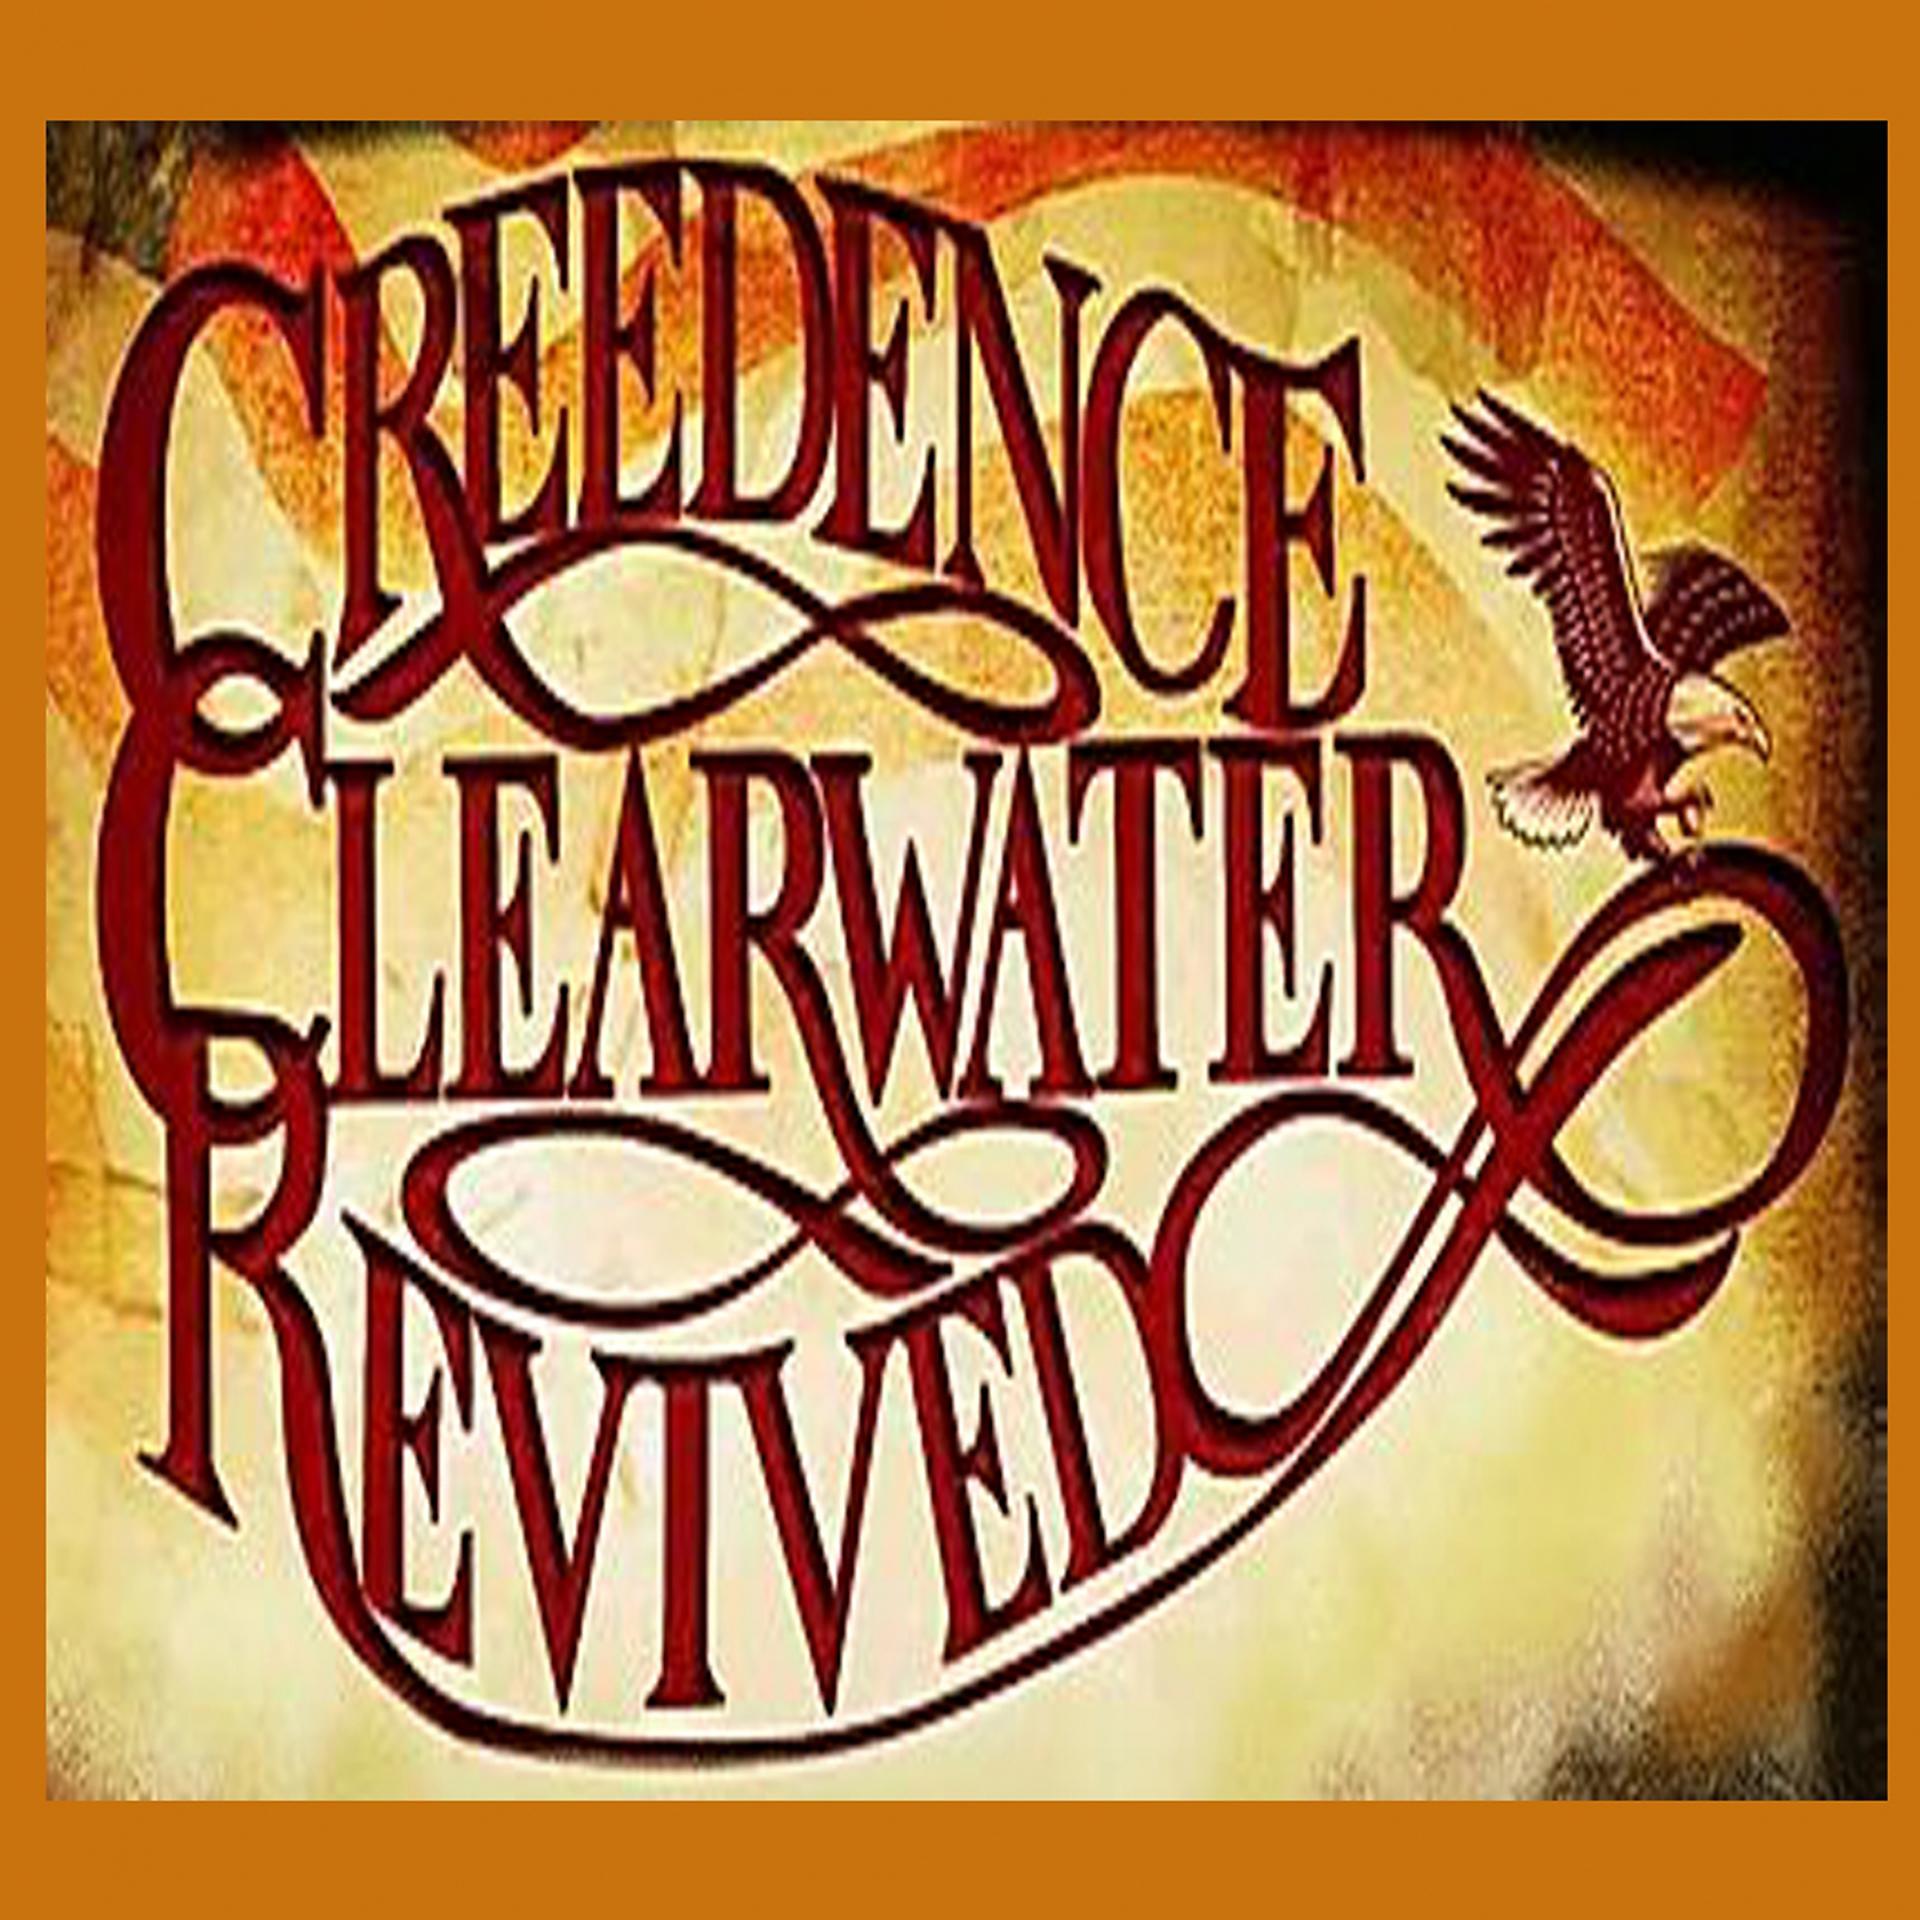 Creedence clearwater revival rain. Creedence Clearwater Revival - have you ever seen the Rain.